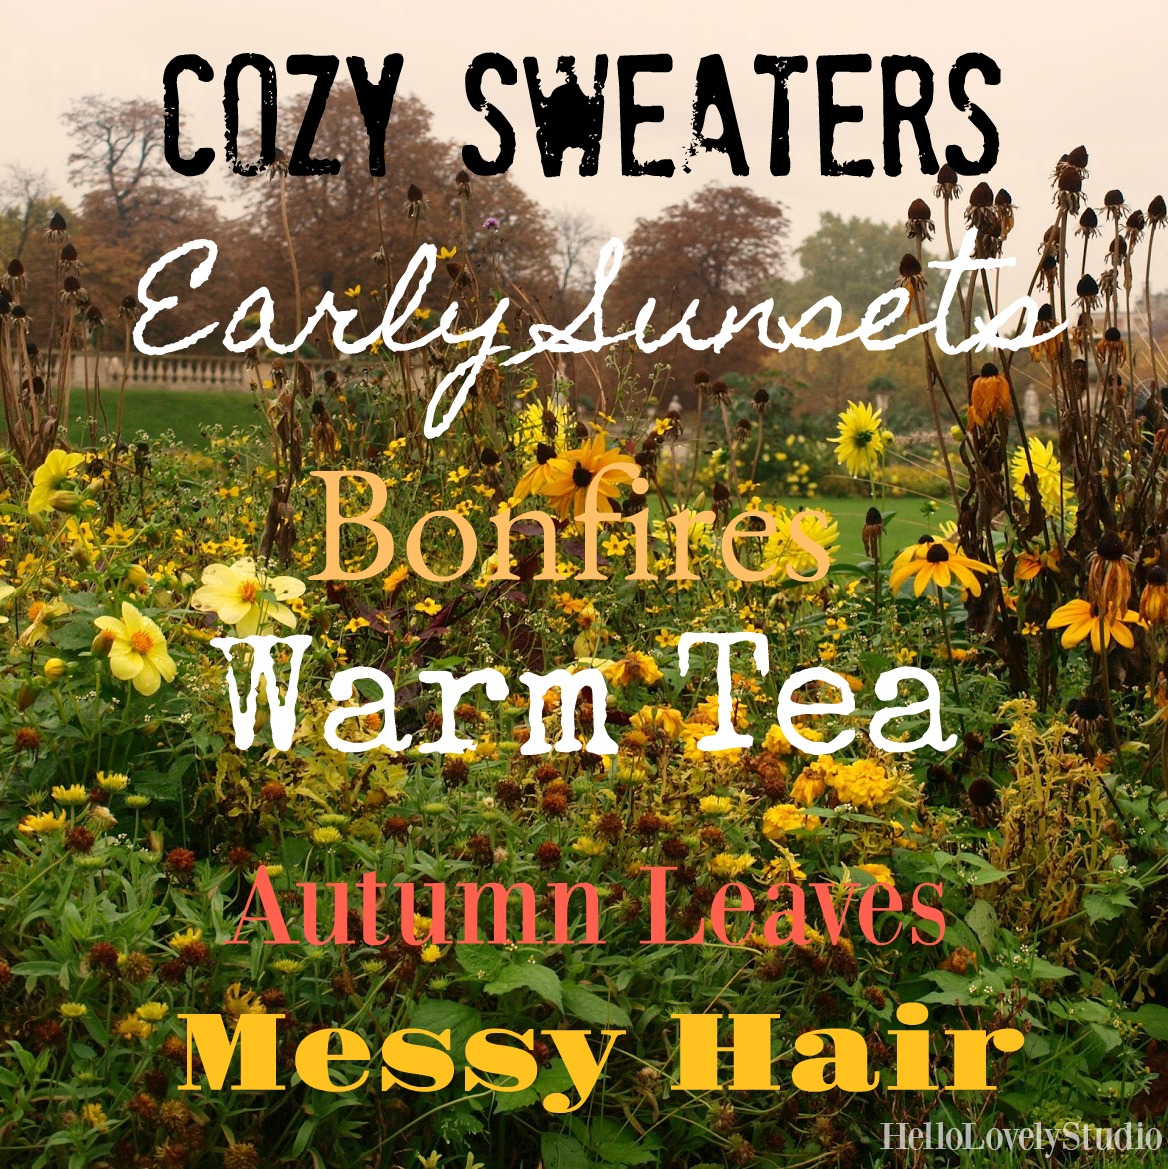 Fall inspiration quote by Hello Lovely Studio. COZY SWEATERS, EARLY SUNSETS, BONFIRES, WARM TEA, AUTUMN LEAVES, MESSY HAIR. #hellolovelystudio #quote #fallquote #fallinspiration